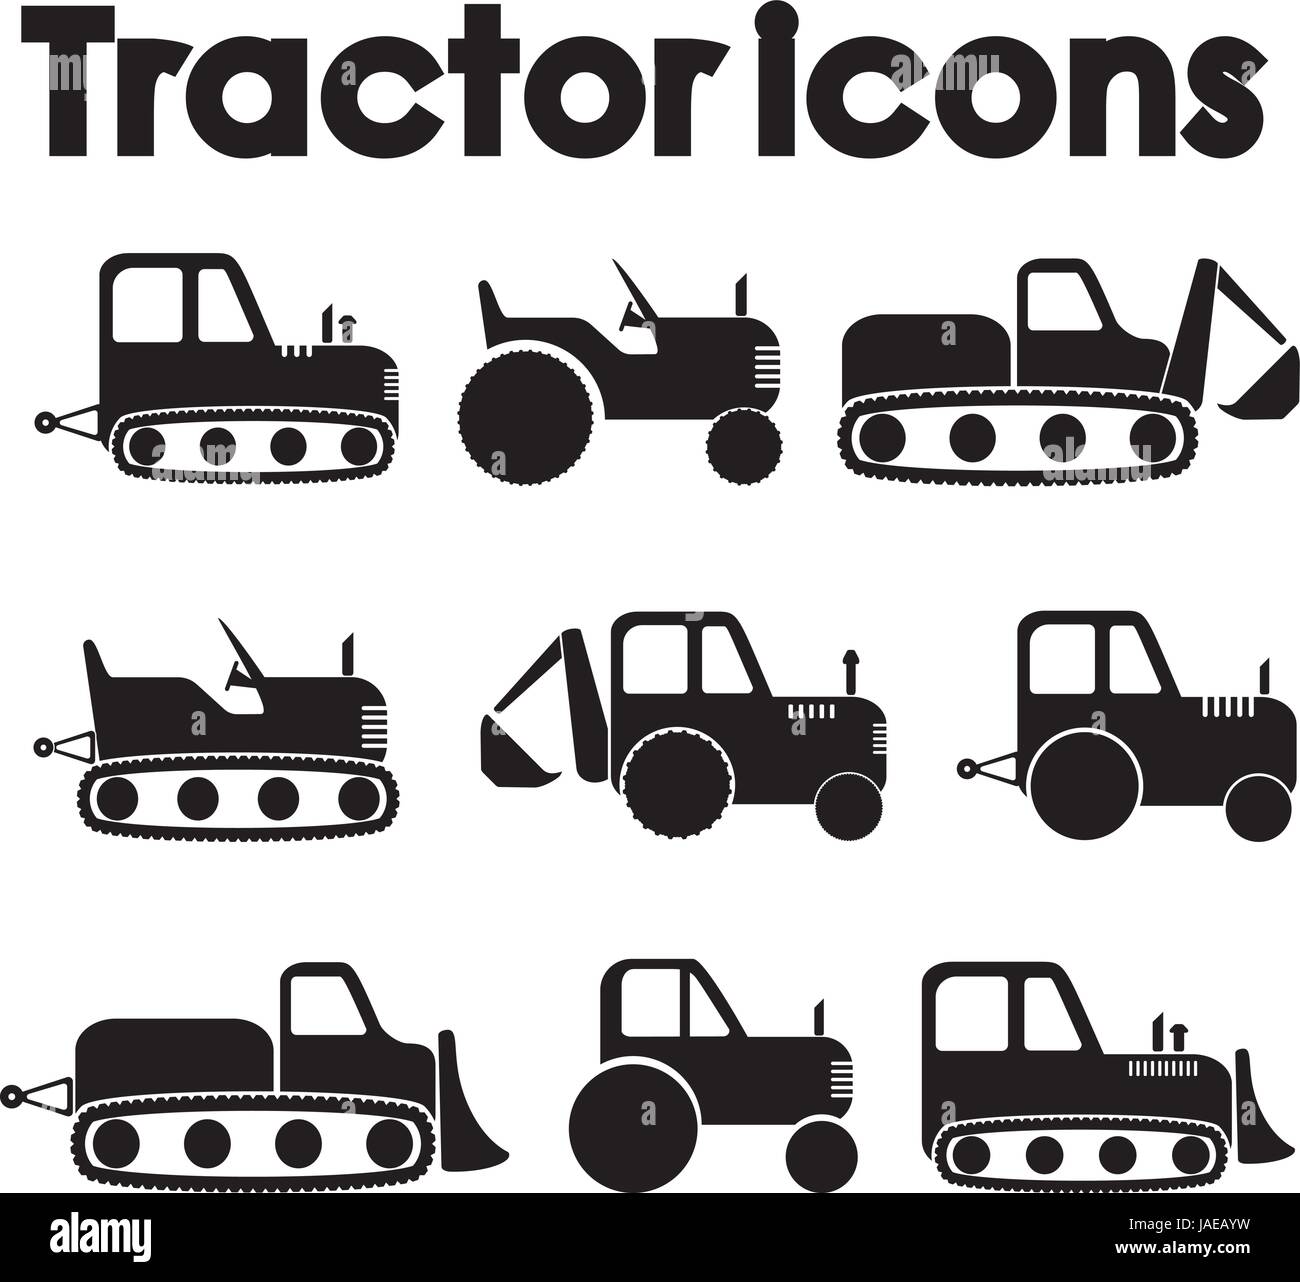 Cut Out Black Various Tractor and Construction Machinery Icon set isolated on white background. Stock Vector